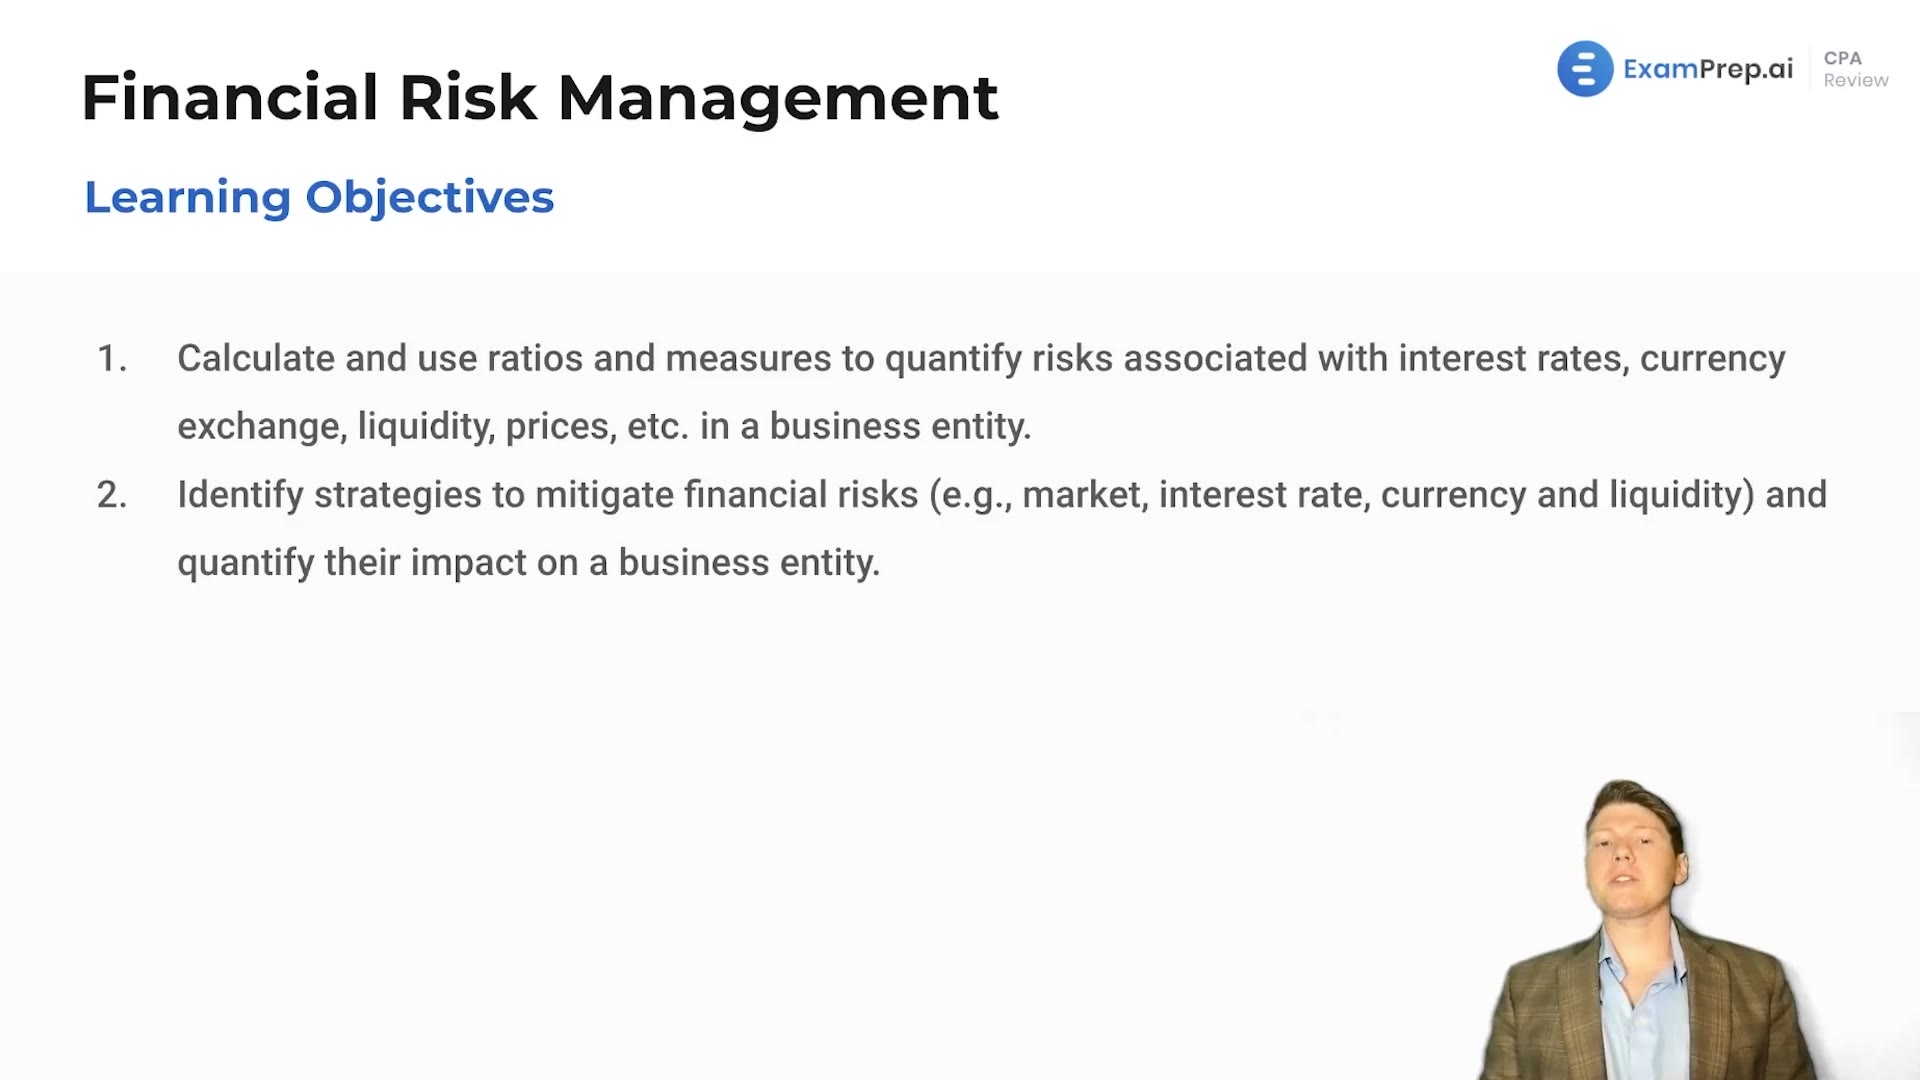 Financial Risk Management Overview and Objectives lesson thumbnail